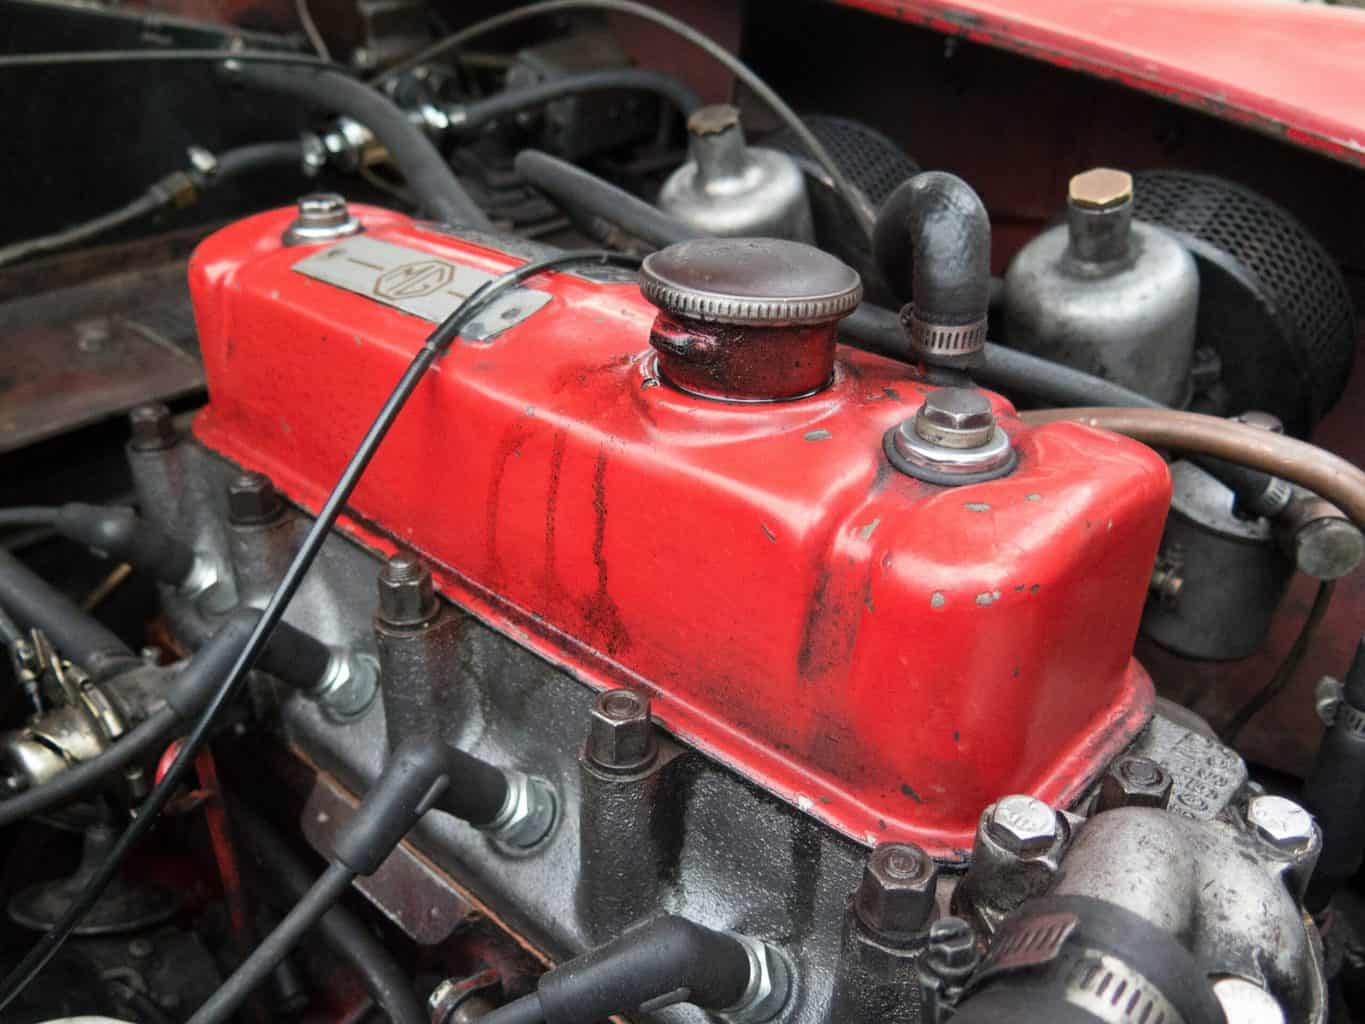 A red oil tank in an engine block